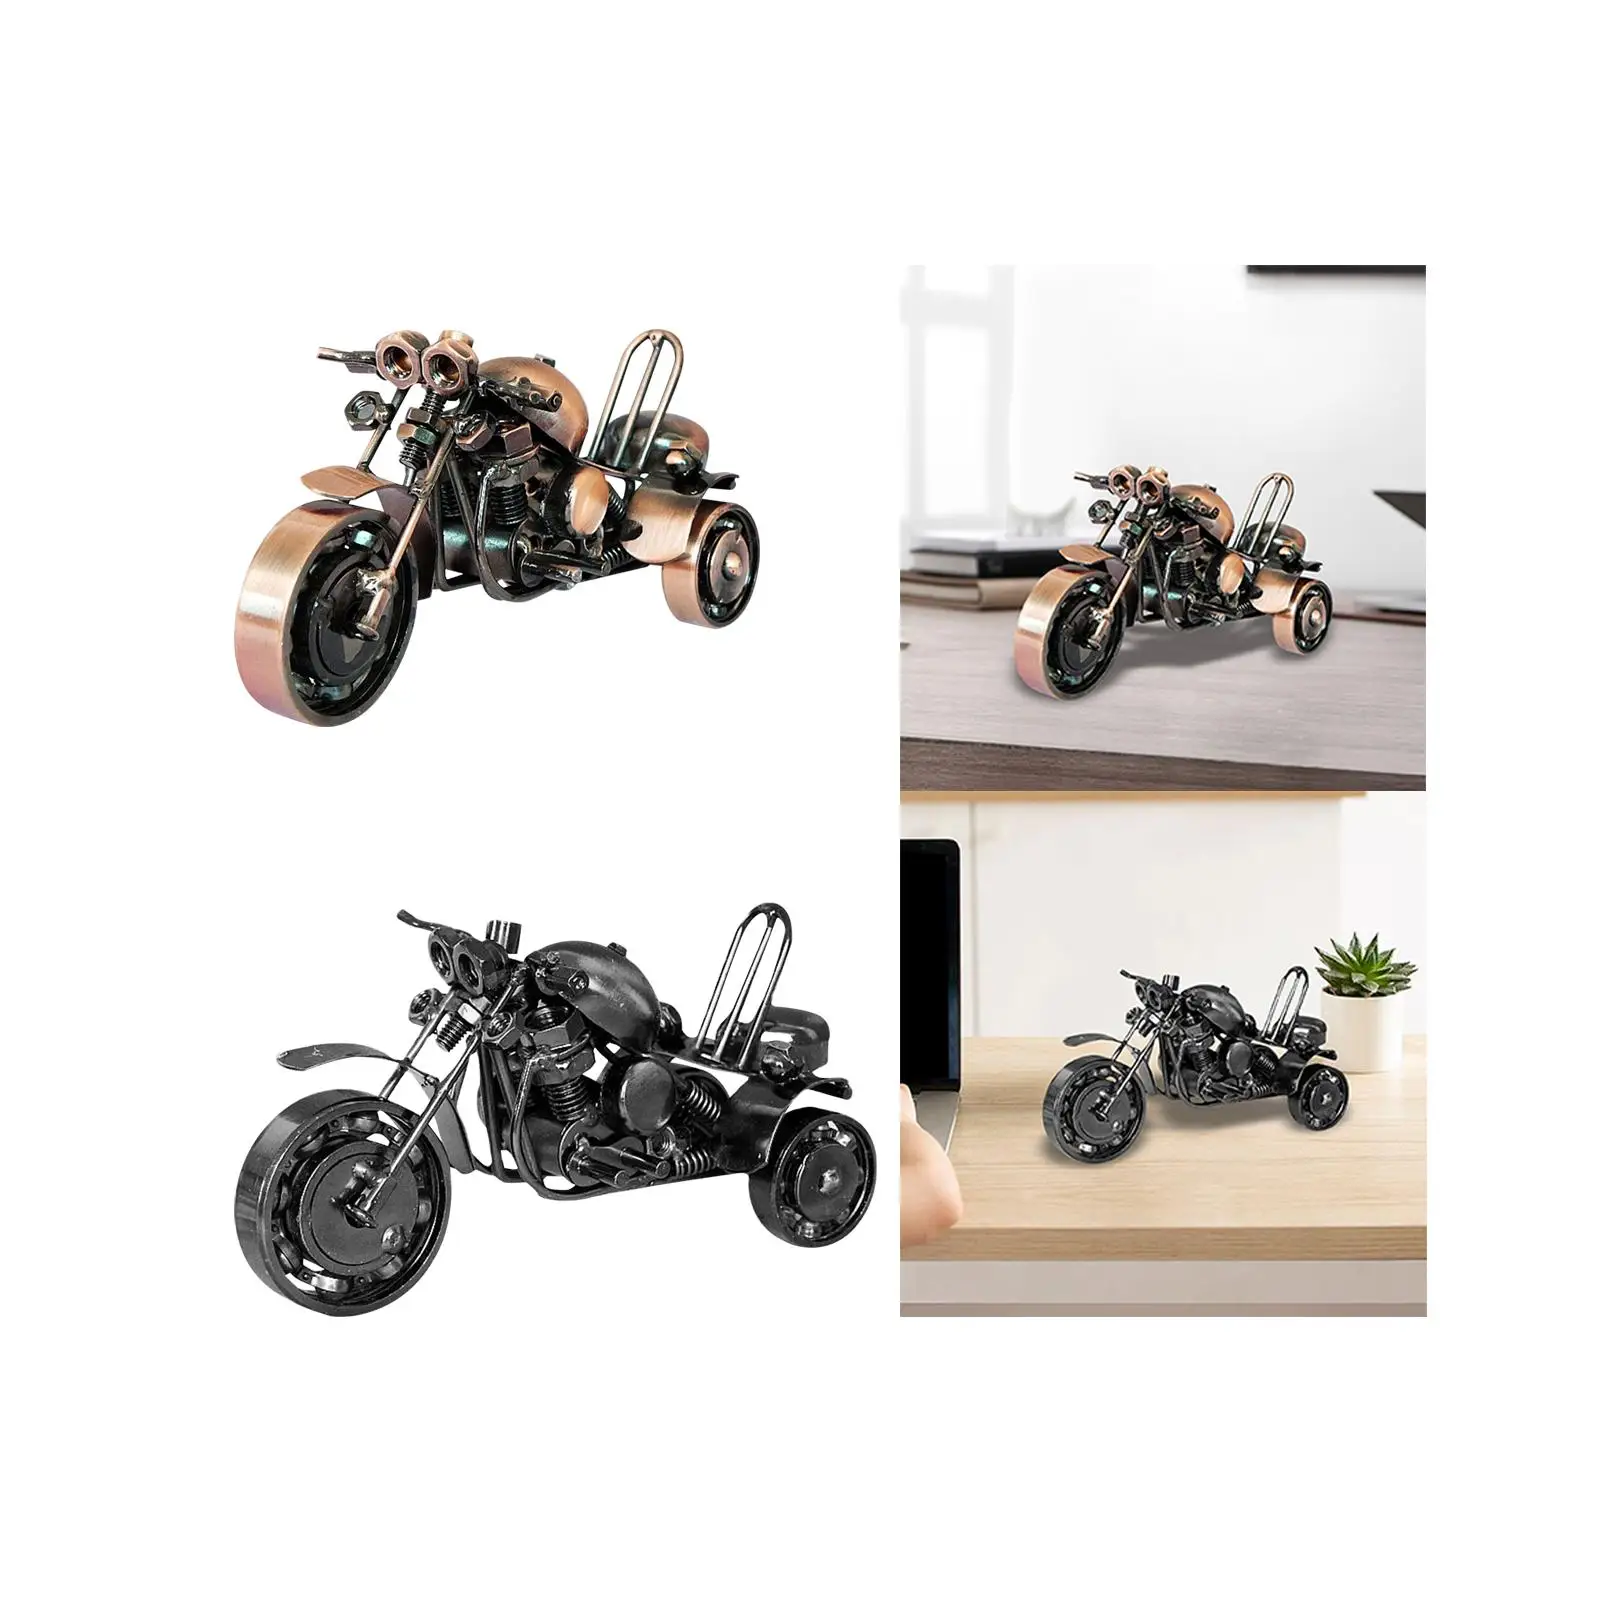 Motor Tricycle Iron Art Sculpture Motorcycle Model 16x6.5x8.5cm Collectible